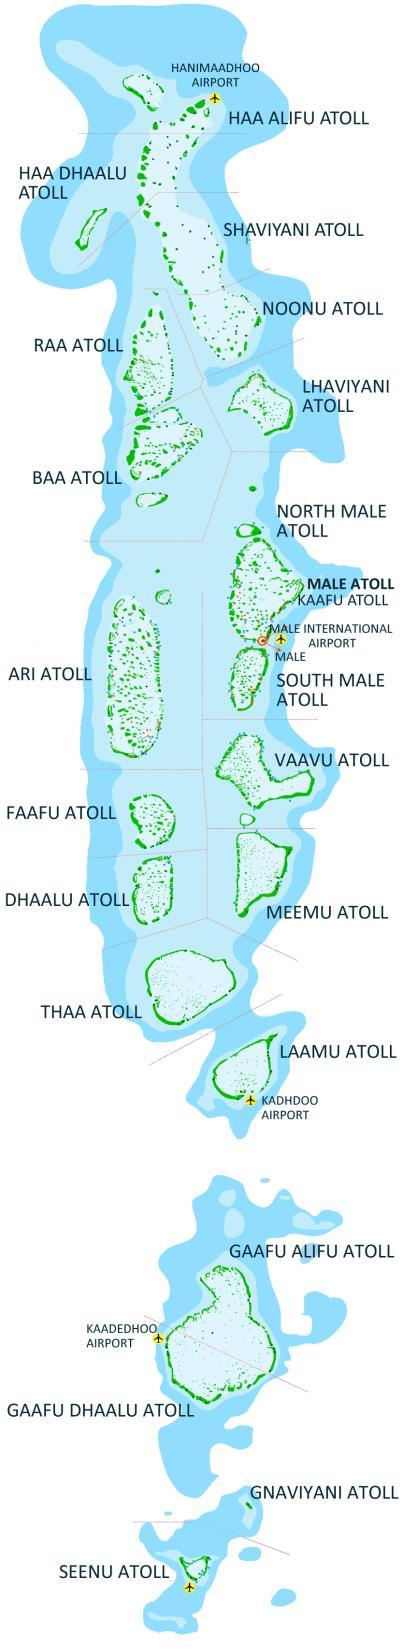 ABOUT MALDIVES Approximately 860 km long and 120 km wide